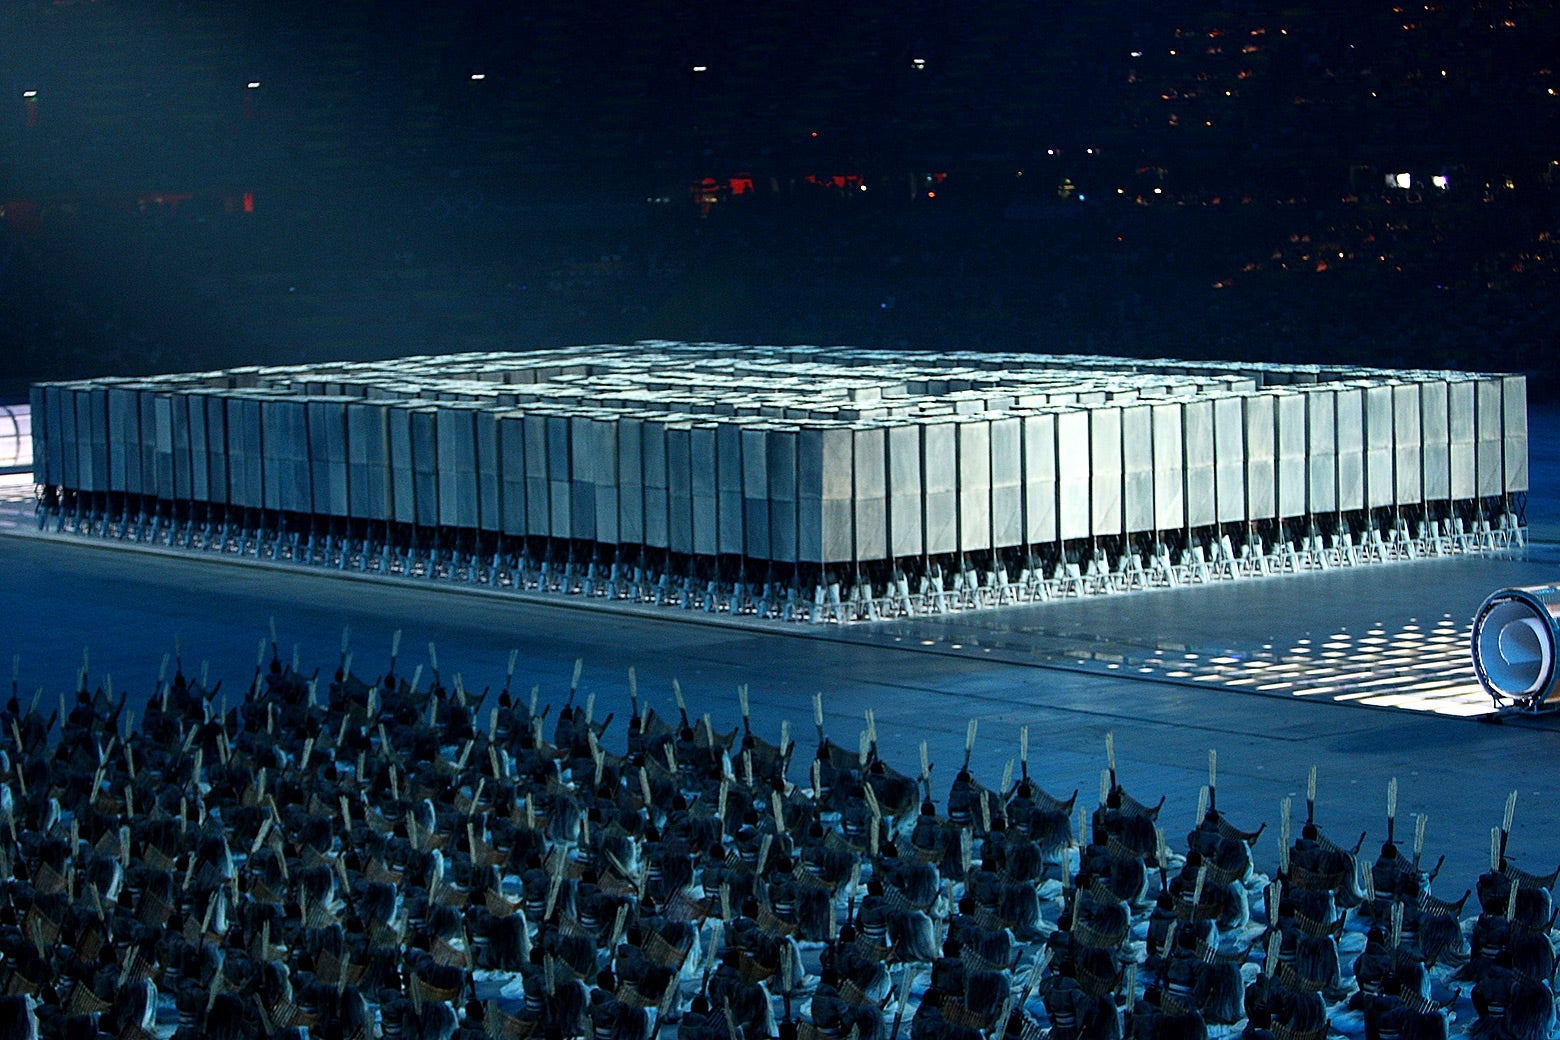 Hundreds of performers holding up boxes in perfect formation on the floor of the Olympic Stadium